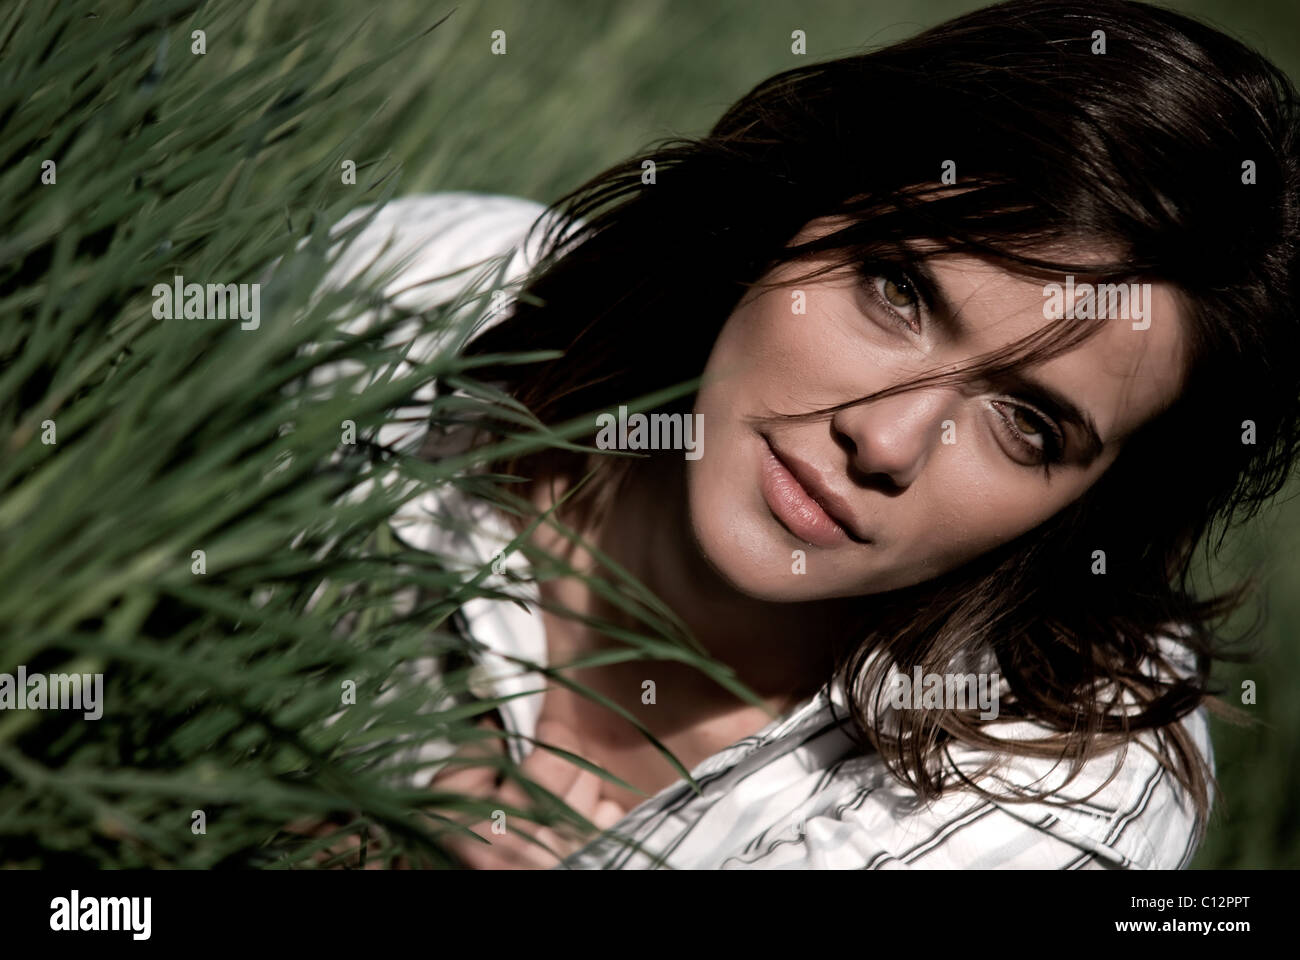 Portait of young woman in grass Stock Photo